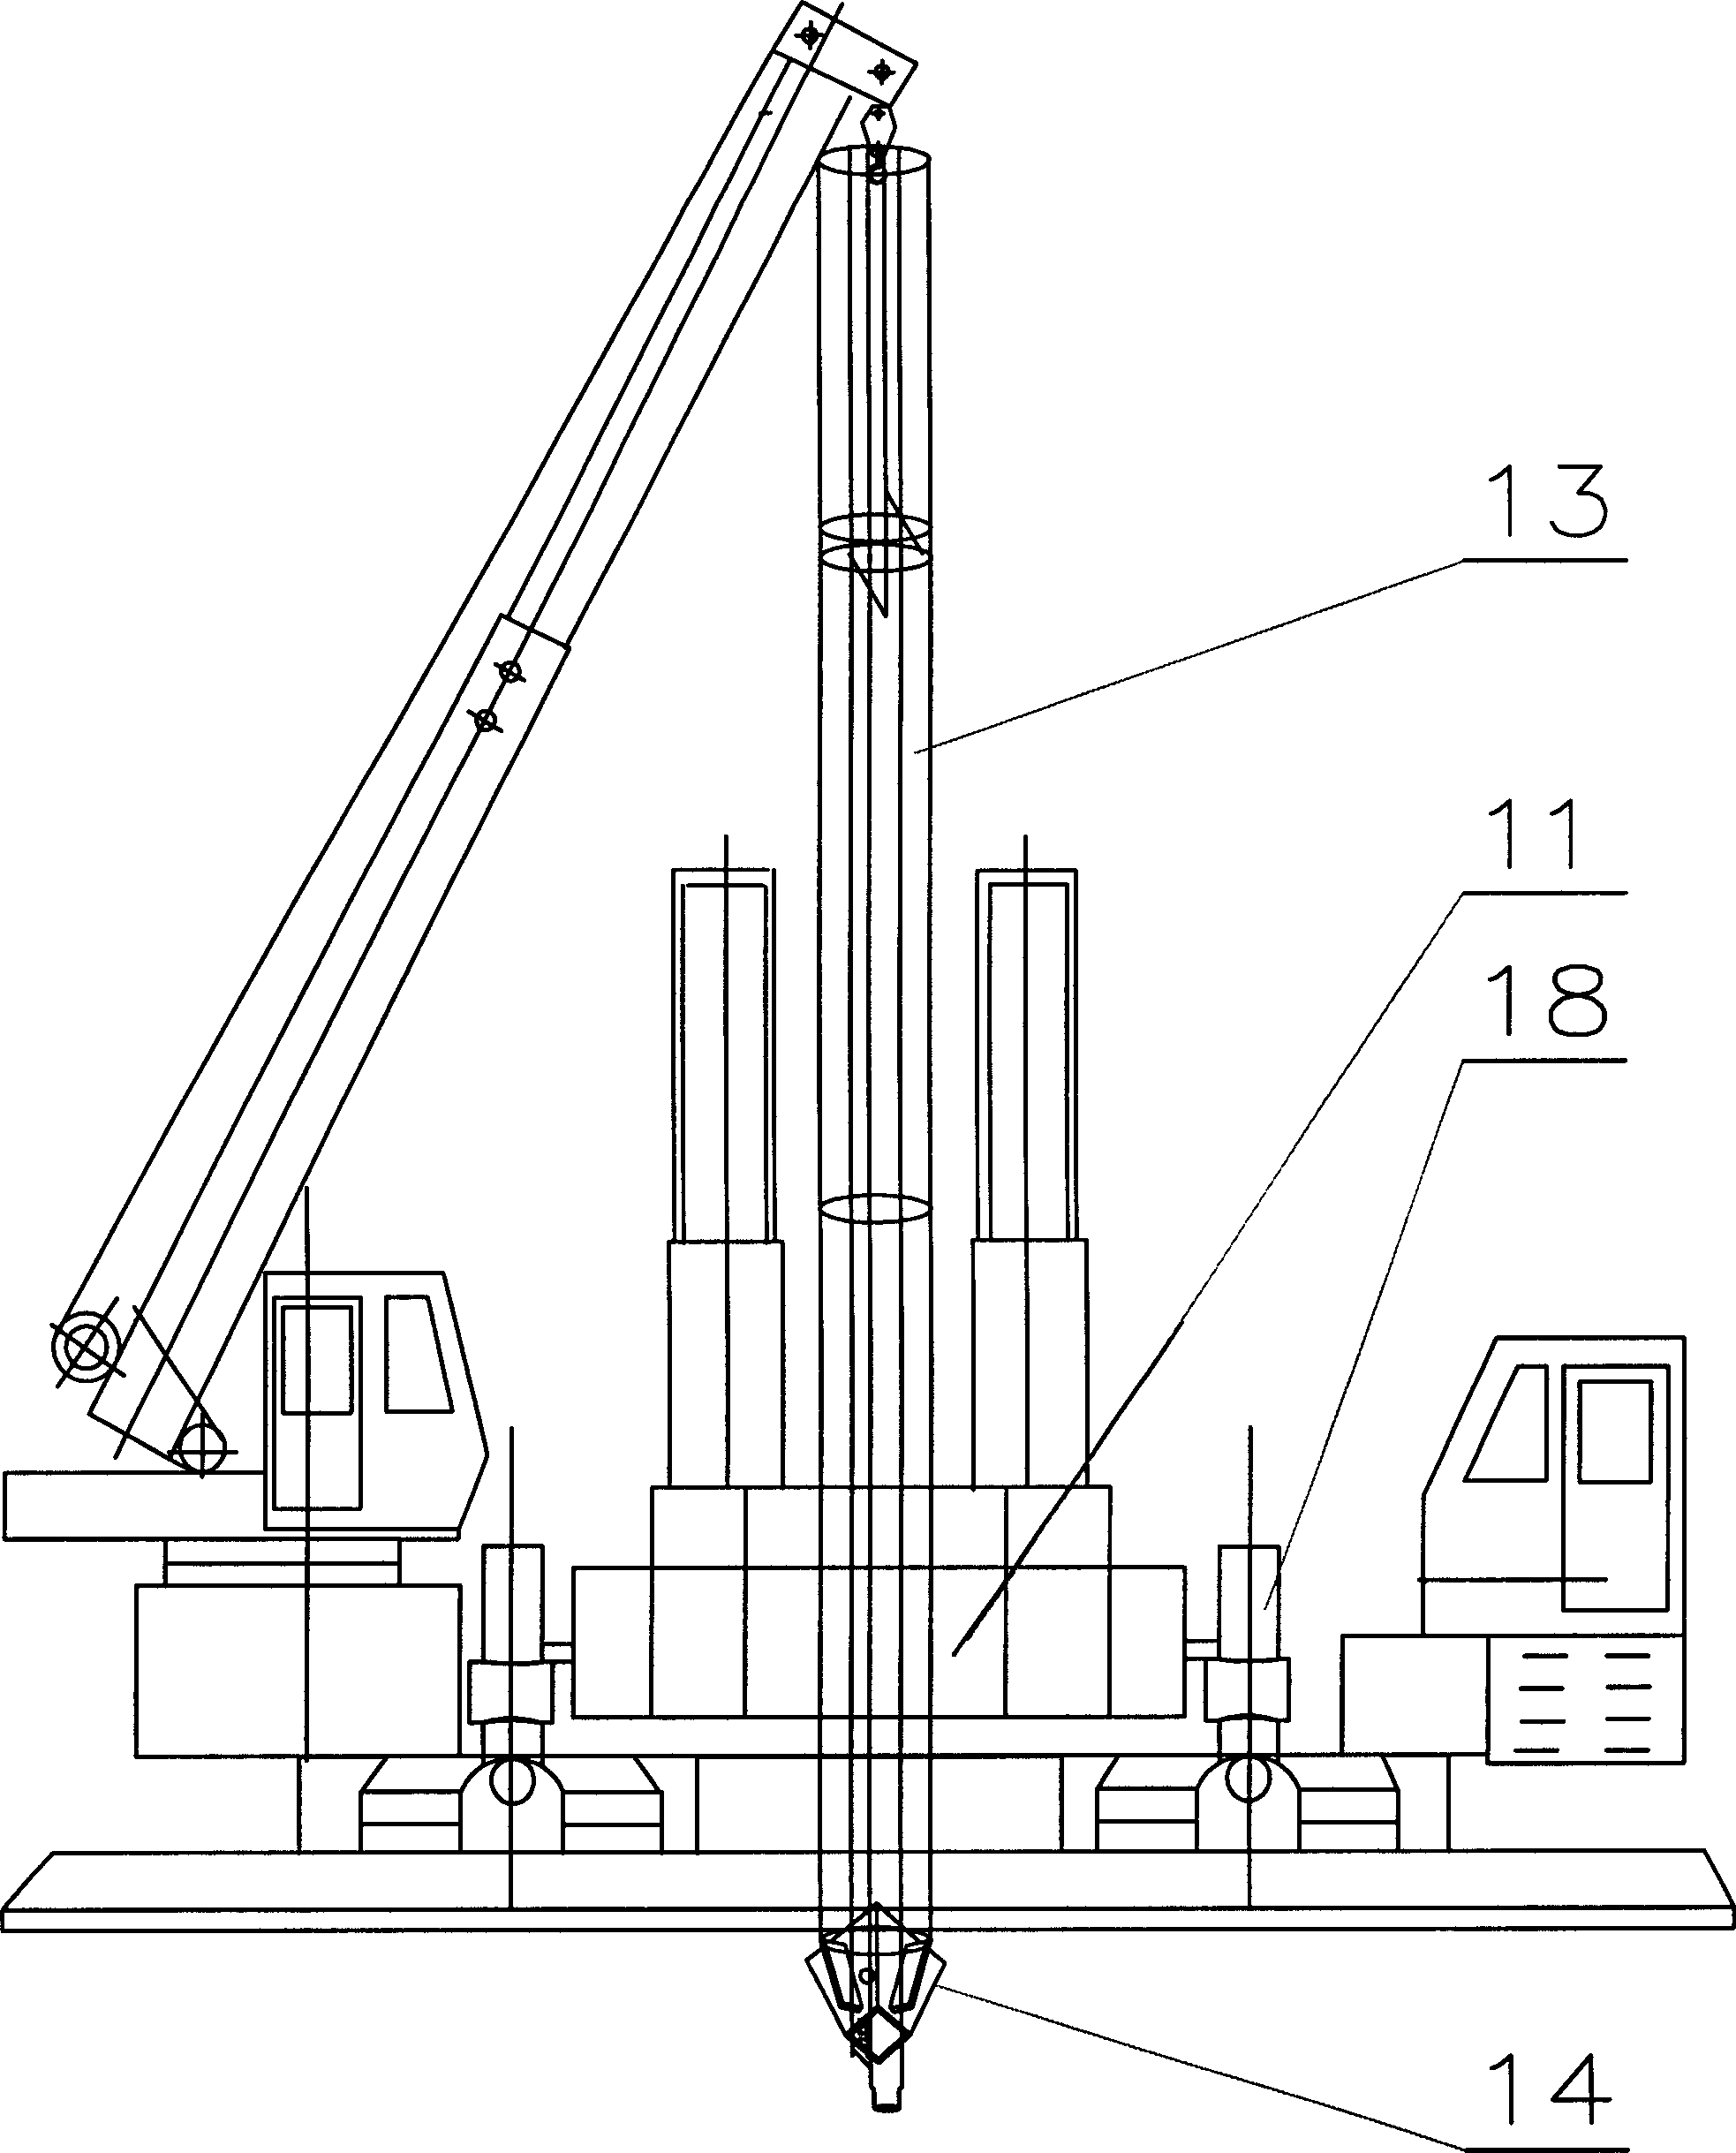 Construction technique for self-leading hole at pile tip of embrace press type PHC tubular pile to enter rock through static pressure